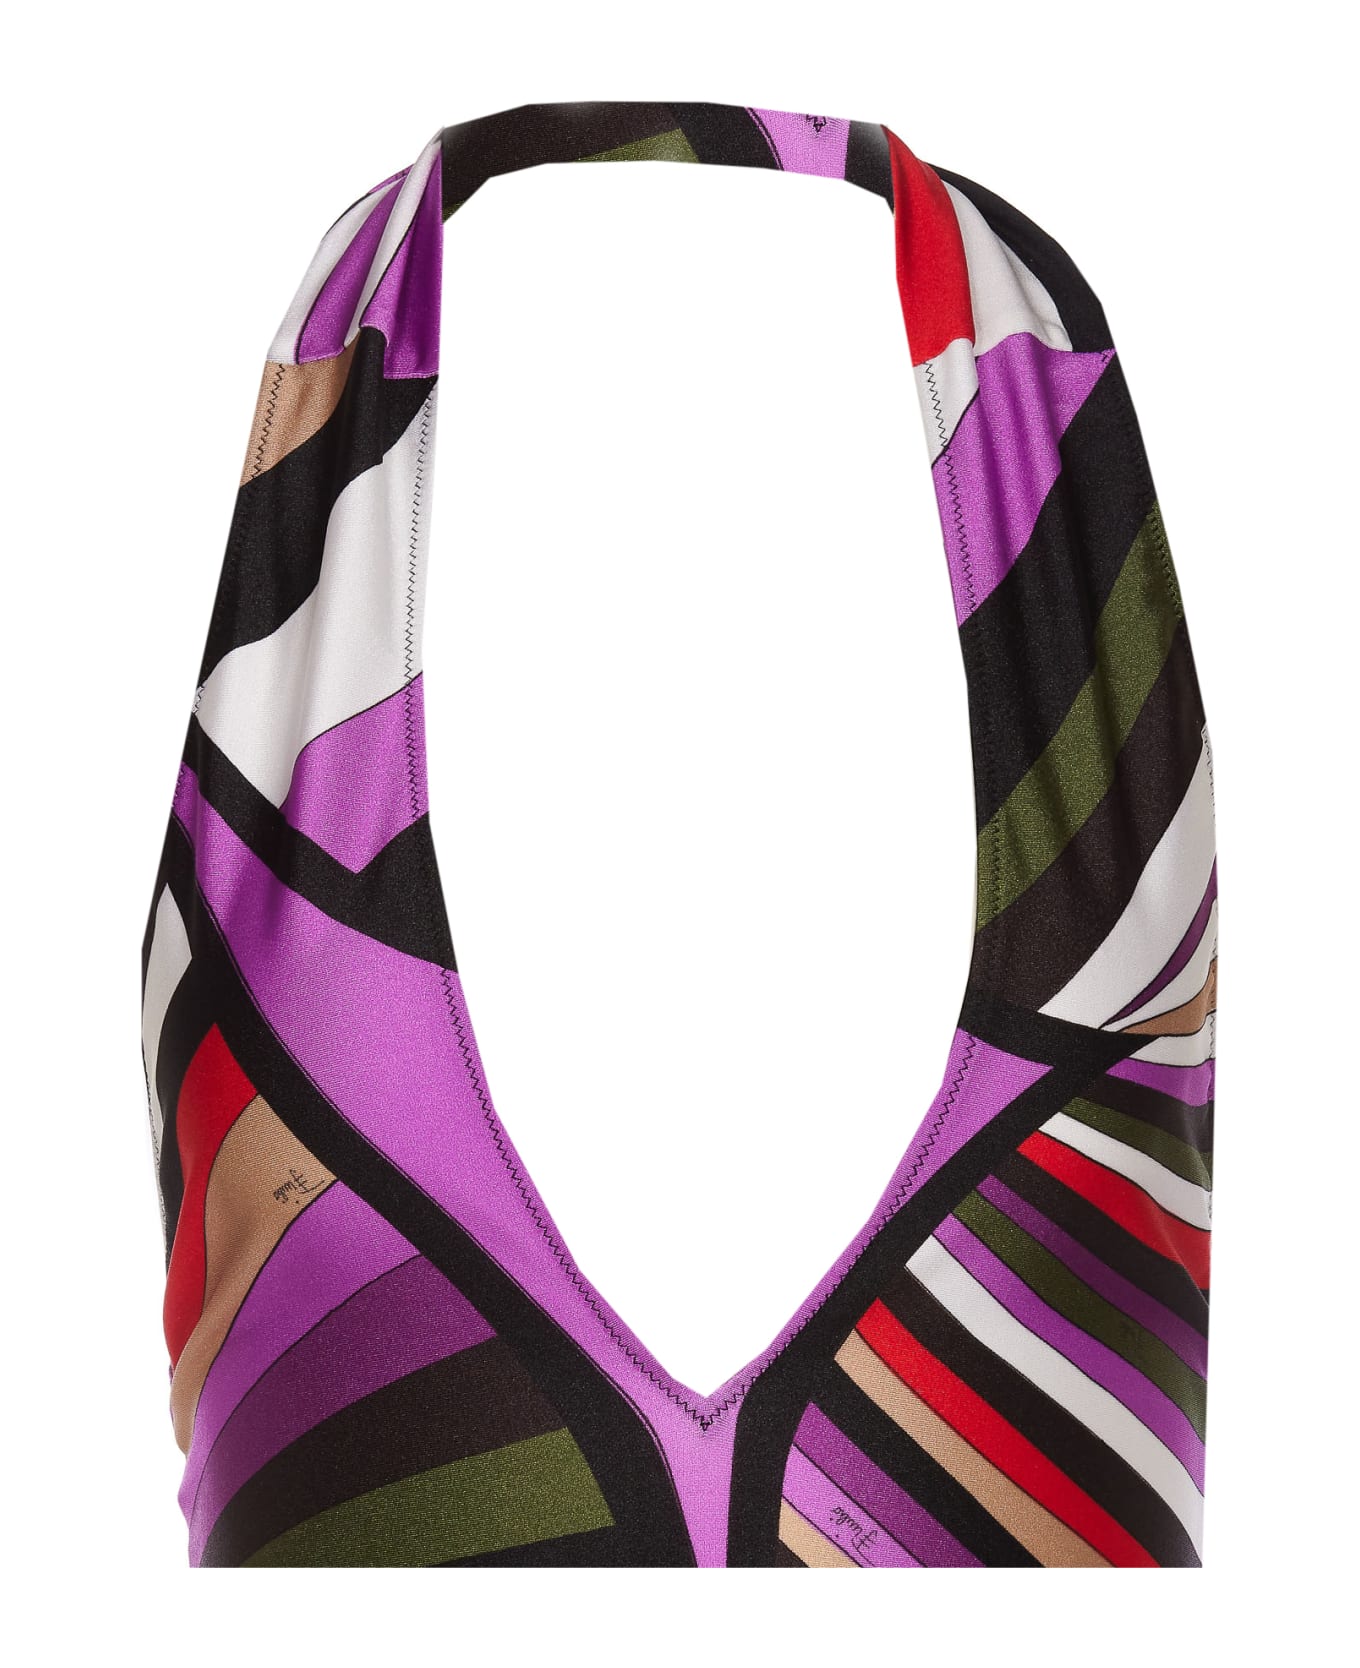 Pucci Swimsuit